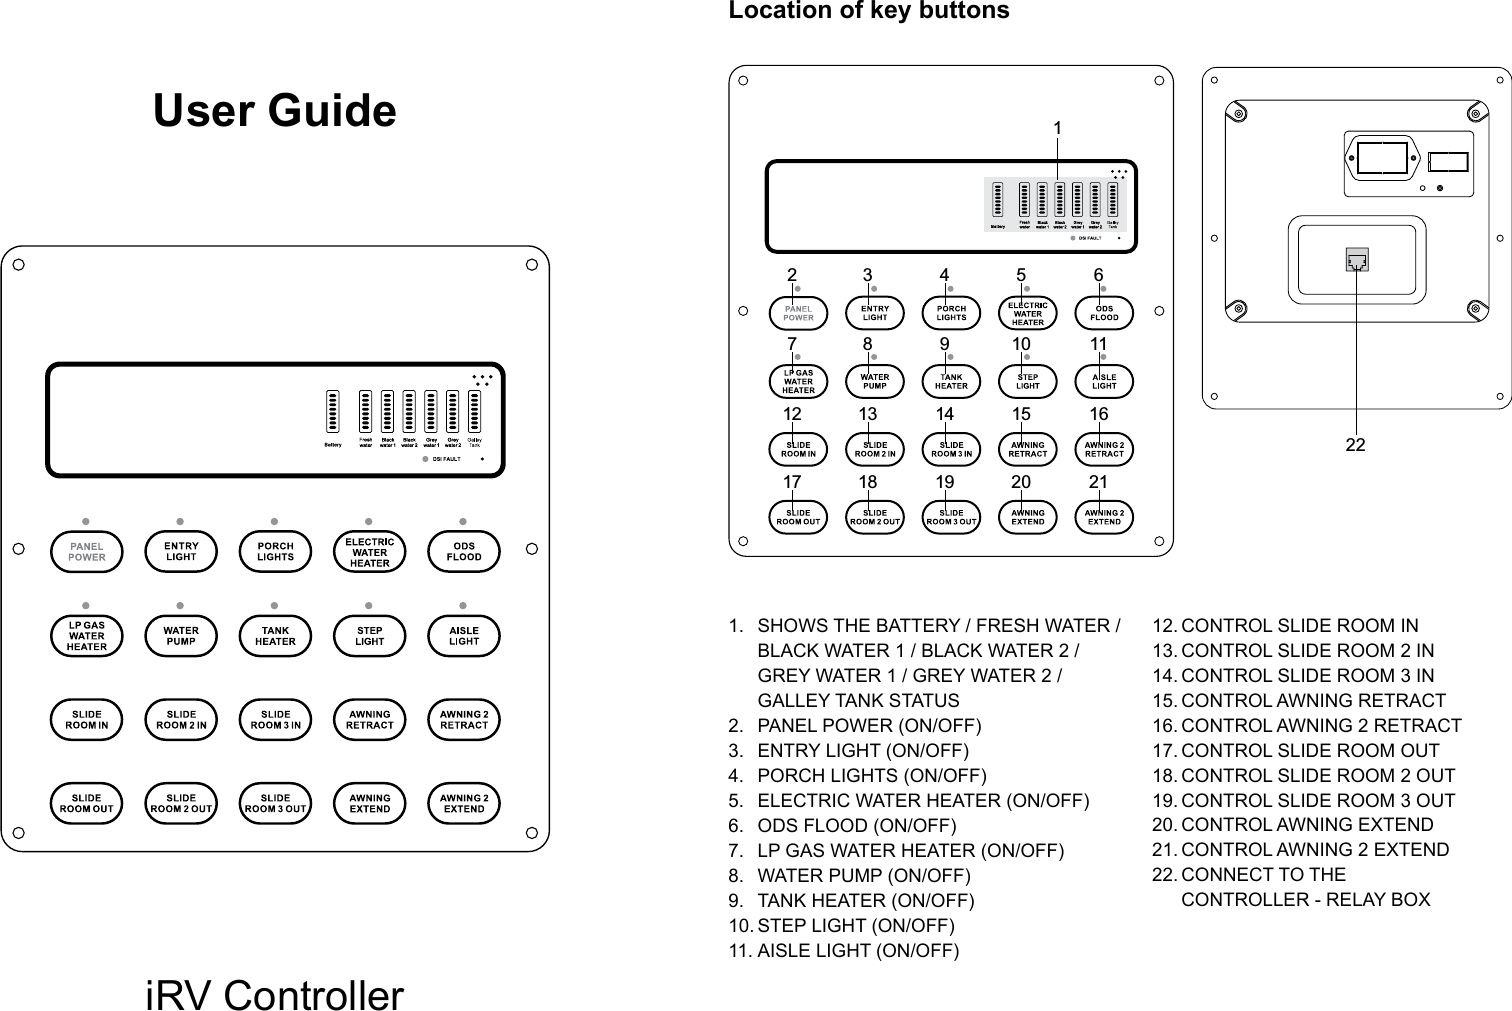 User GuideiRV ControllerLocation of key buttons1.  SHOWS THE BATTERY / FRESH WATER /  BLACK WATER 1 / BLACK WATER 2 /  GREY WATER 1 / GREY WATER 2 /  GALLEY TANK STATUS2.  PANEL POWER (ON/OFF)3.  ENTRY LIGHT (ON/OFF)4.  PORCH LIGHTS (ON/OFF)5.  ELECTRIC WATER HEATER (ON/OFF)6.  ODS FLOOD (ON/OFF)7.  LP GAS WATER HEATER (ON/OFF)8.  WATER PUMP (ON/OFF)9.  TANK HEATER (ON/OFF)10. STEP LIGHT (ON/OFF)11. AISLE LIGHT (ON/OFF)12. CONTROL SLIDE ROOM IN13. CONTROL SLIDE ROOM 2 IN14. CONTROL SLIDE ROOM 3 IN15. CONTROL AWNING RETRACT16. CONTROL AWNING 2 RETRACT17. CONTROL SLIDE ROOM OUT18. CONTROL SLIDE ROOM 2 OUT19. CONTROL SLIDE ROOM 3 OUT20. CONTROL AWNING EXTEND21. CONTROL AWNING 2 EXTEND22. CONNECT TO THE   CONTROLLER - RELAY BOX2 3 4 5167 8 9 10 1112 13 14 15 1617 18 19 20 2122